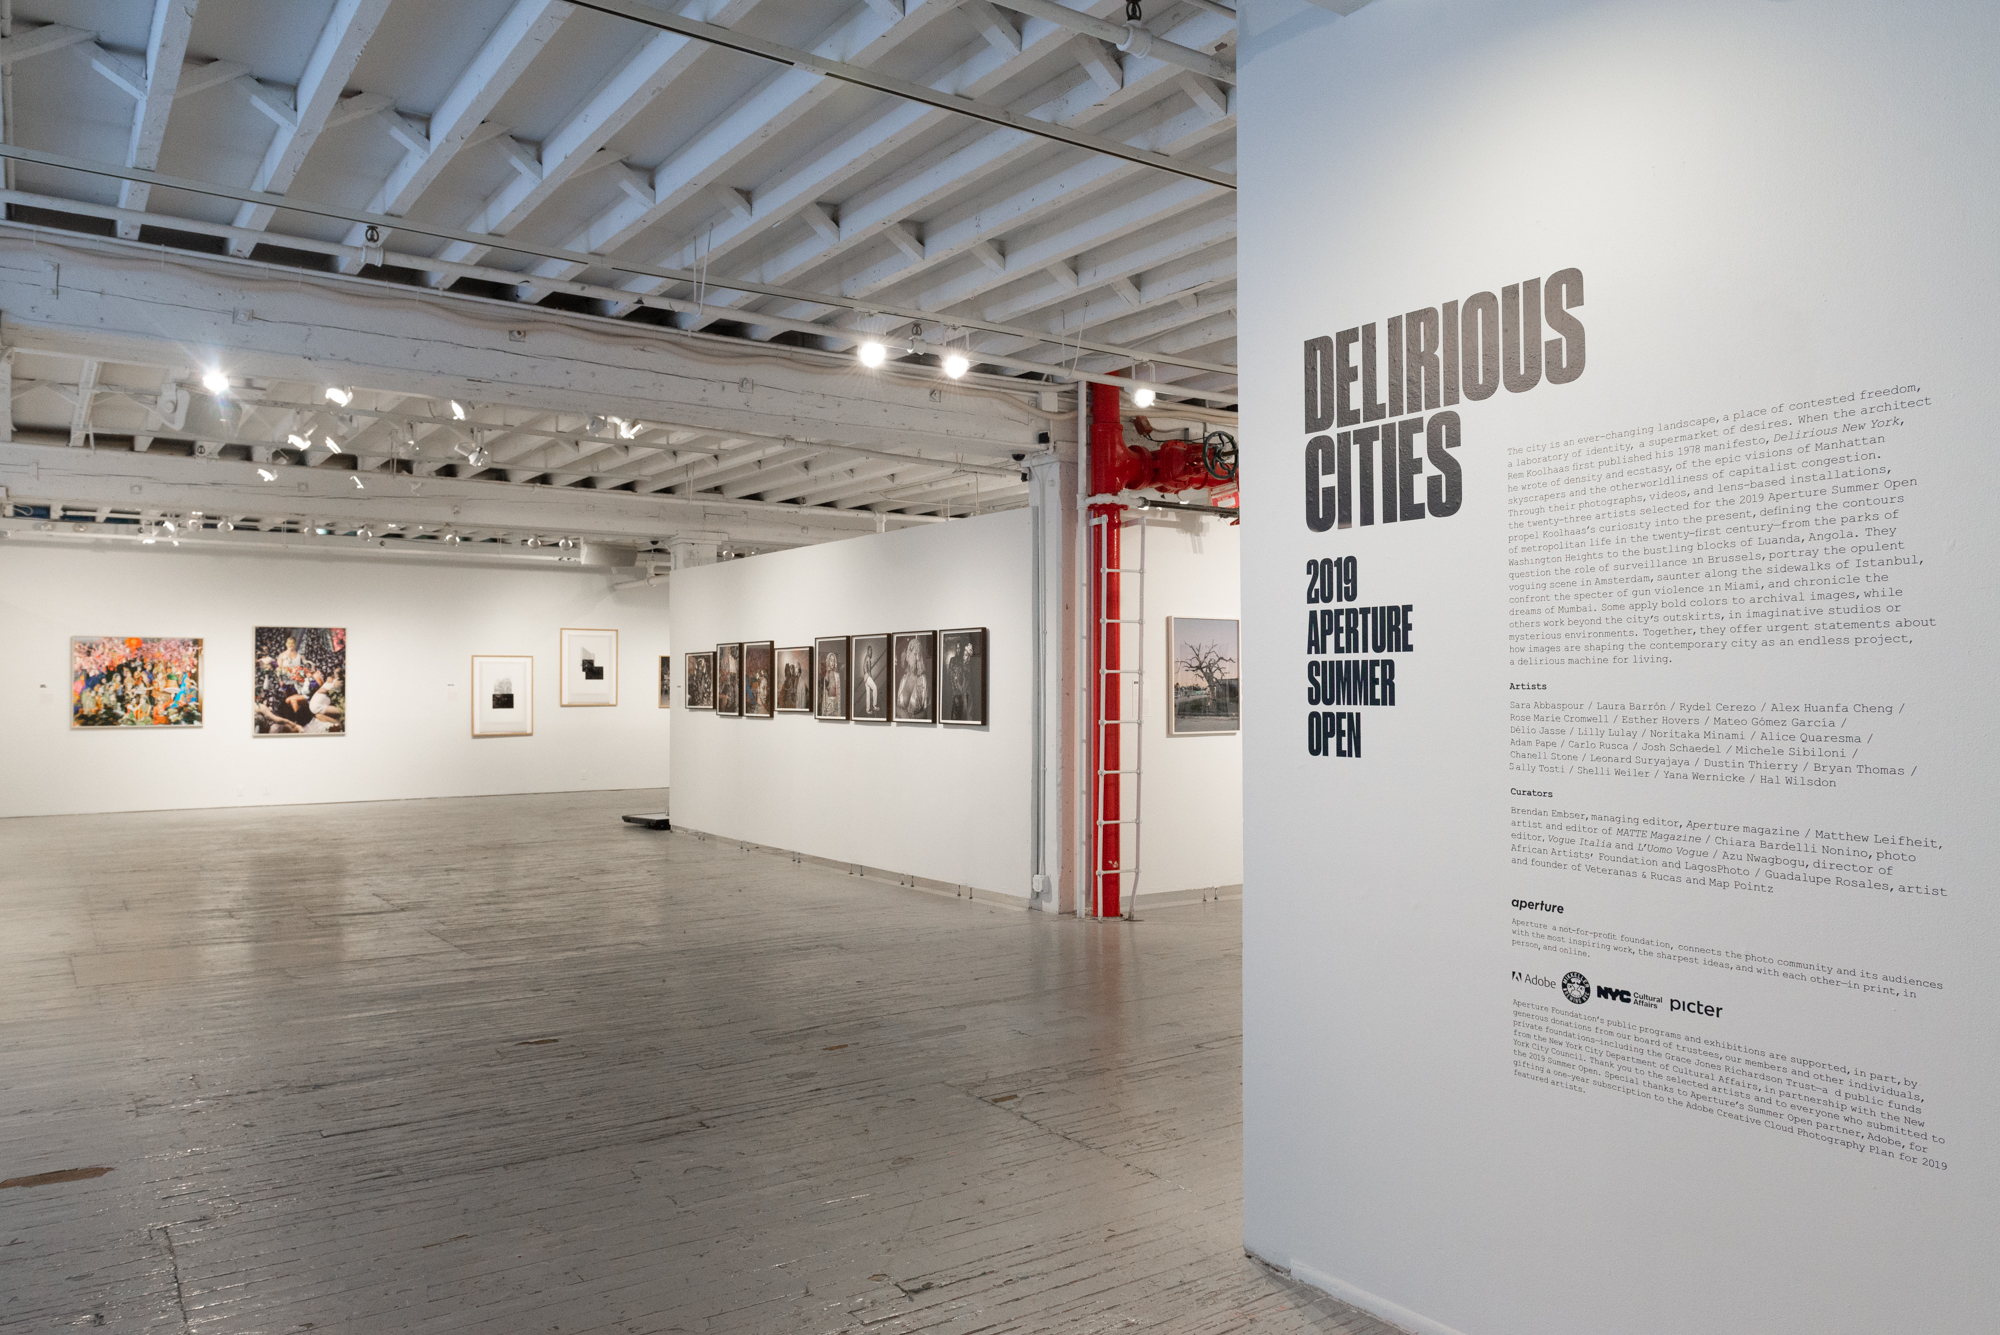  Aperture Summer Open 2019: Delirious Cities, Group Exhibition, July 2019, Aperture Foundation, New York, NY 